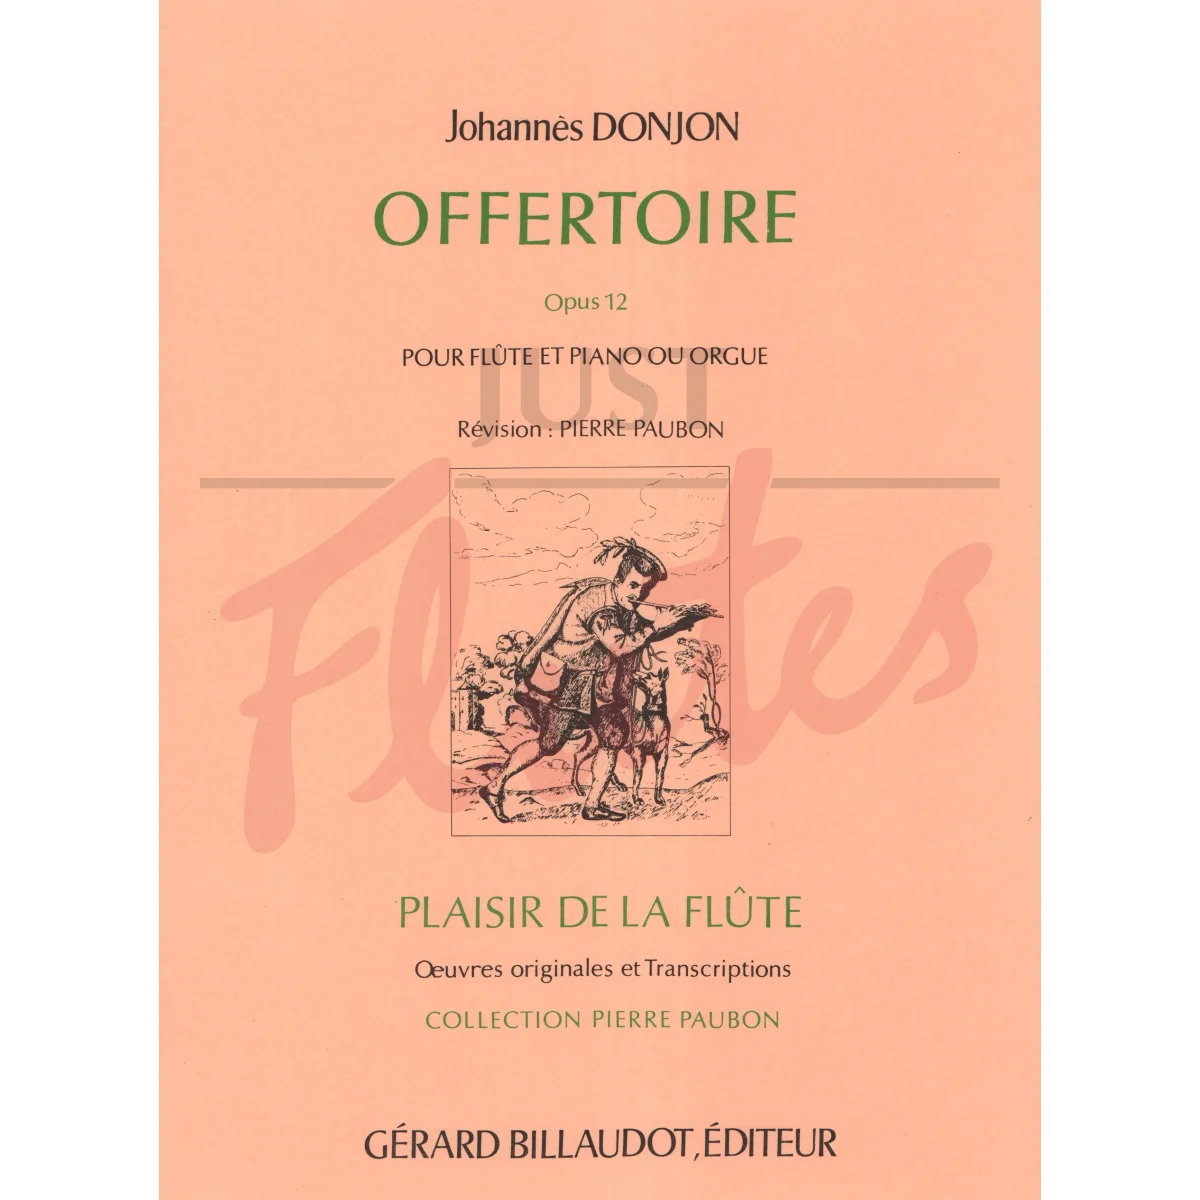 Offertoire for Flute and Piano/Organ